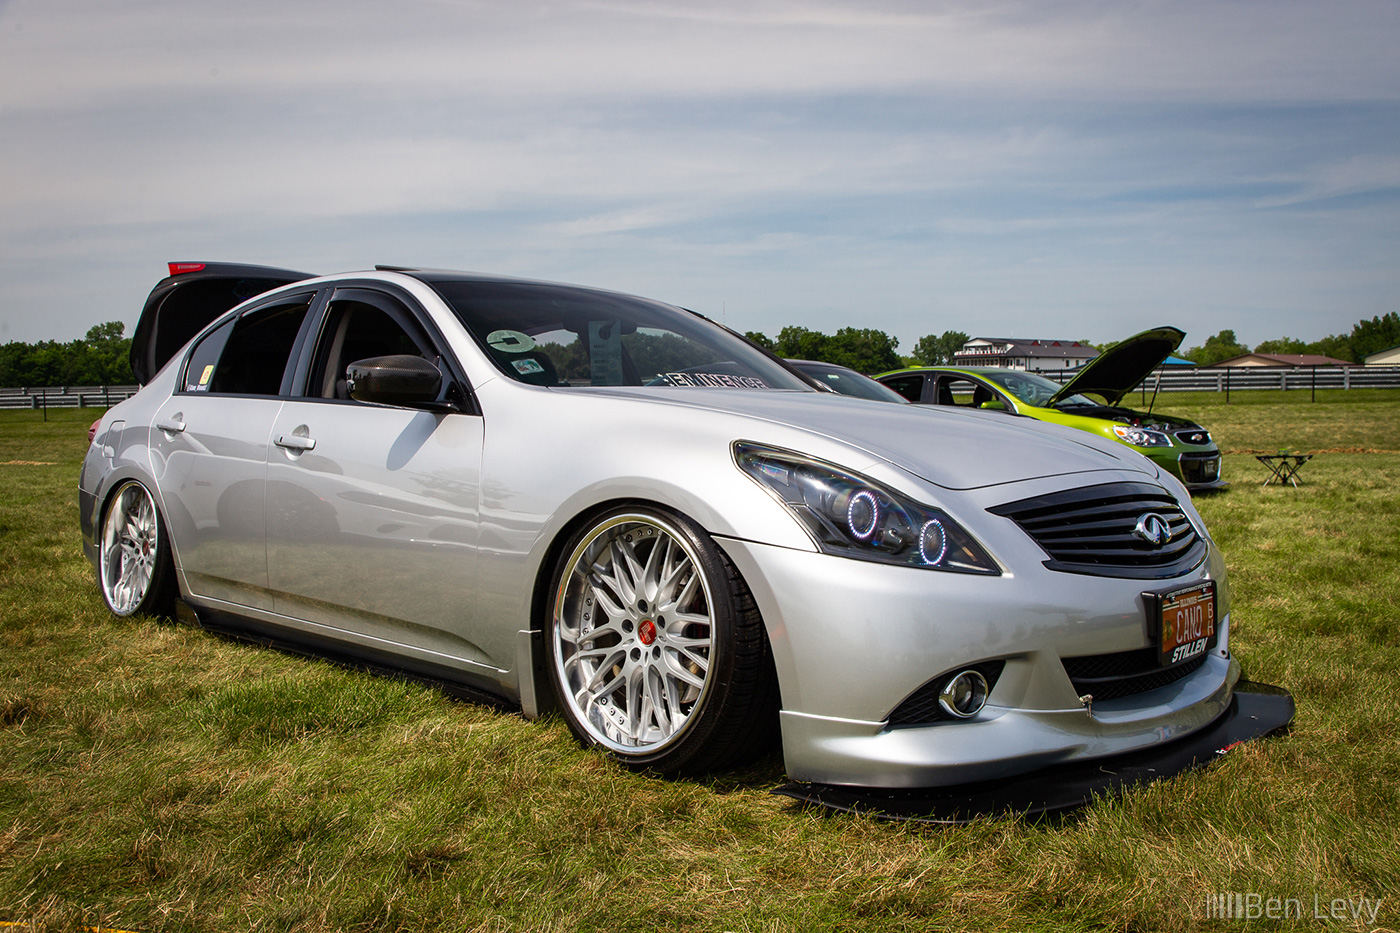 Silver Infiniti G37 with Modifications